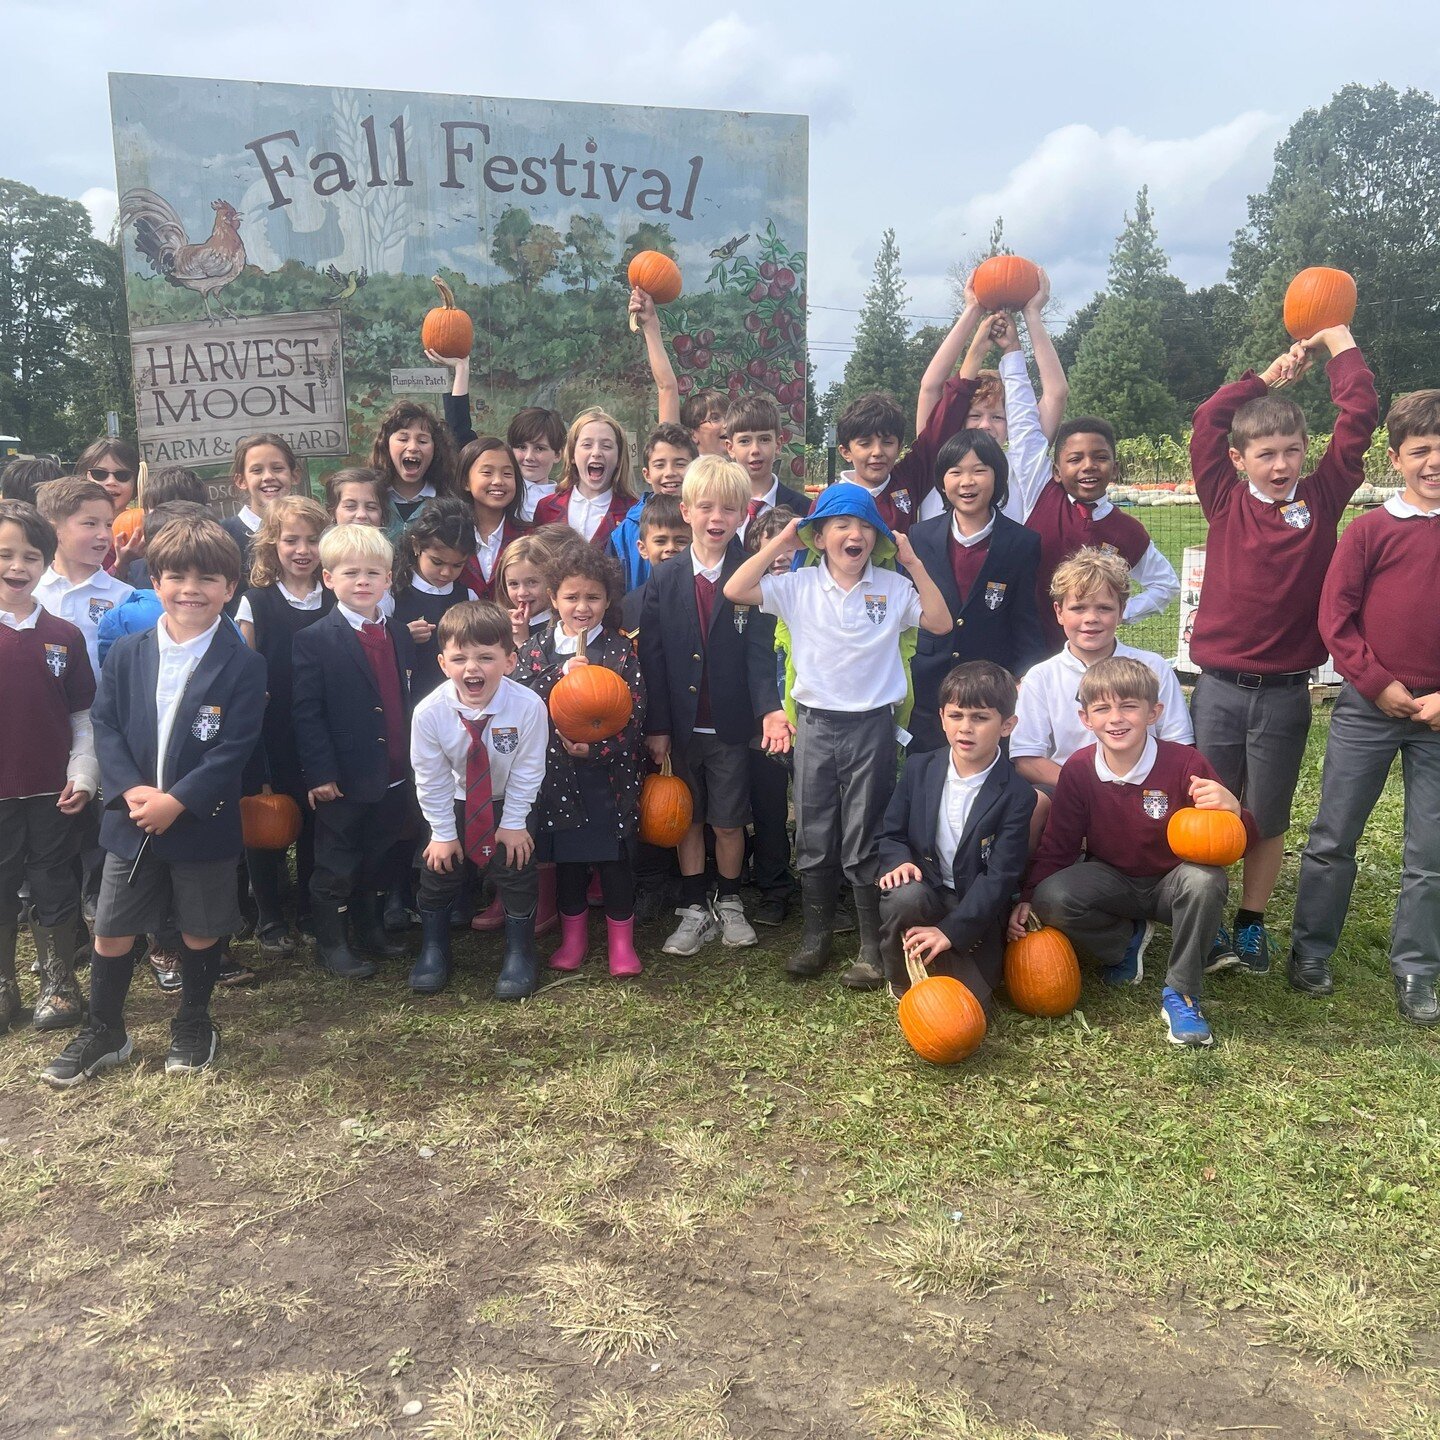 Hawthorn's field trips have officially begun, and they've been a blast for our students!
Grades K-5 took a field trip to Harvest Moon Orchard. They immersed themselves in nature, enjoying a scenic hayride through the orchard, meeting the friendly goa